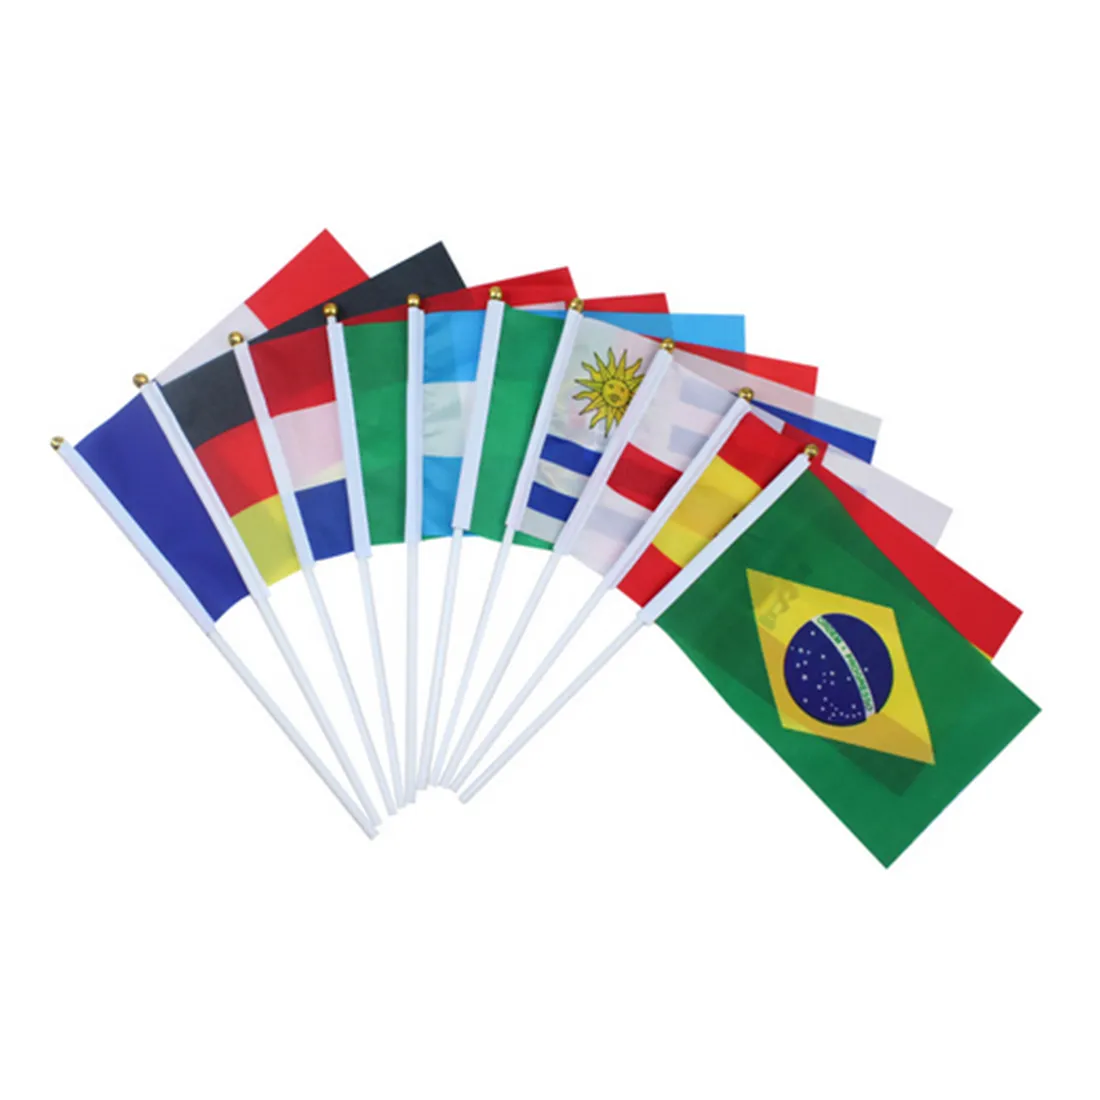 Sur World Cup Hand Held Flags With Poles 32 Countries Hold National Flags Party Decorations